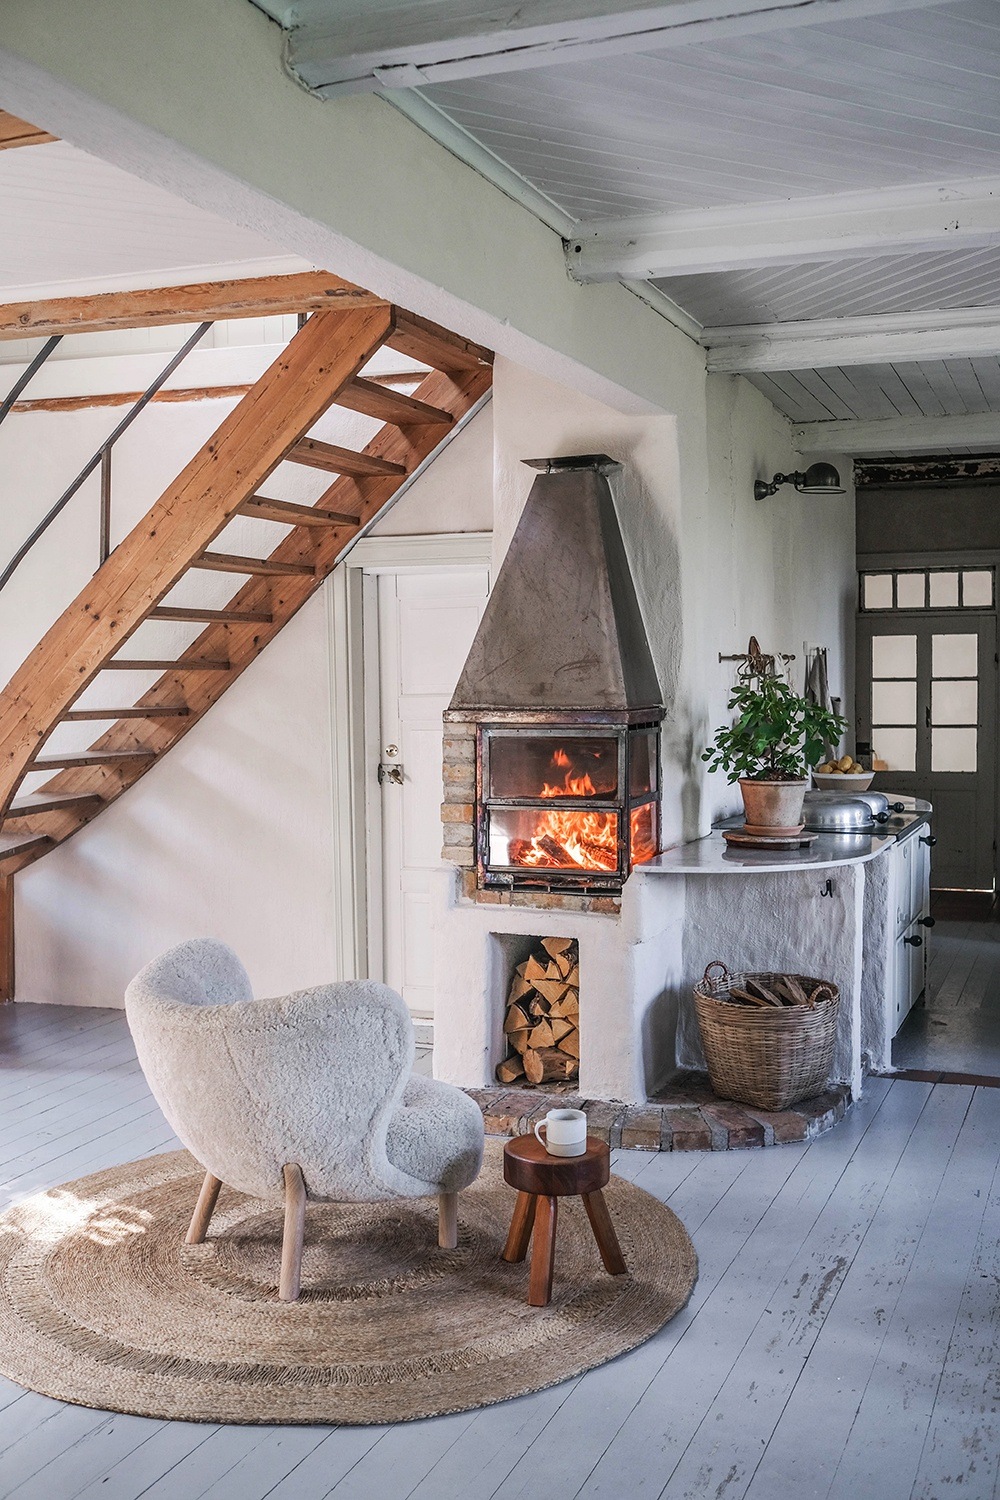 Home Tour – Our Swedish Vacation House